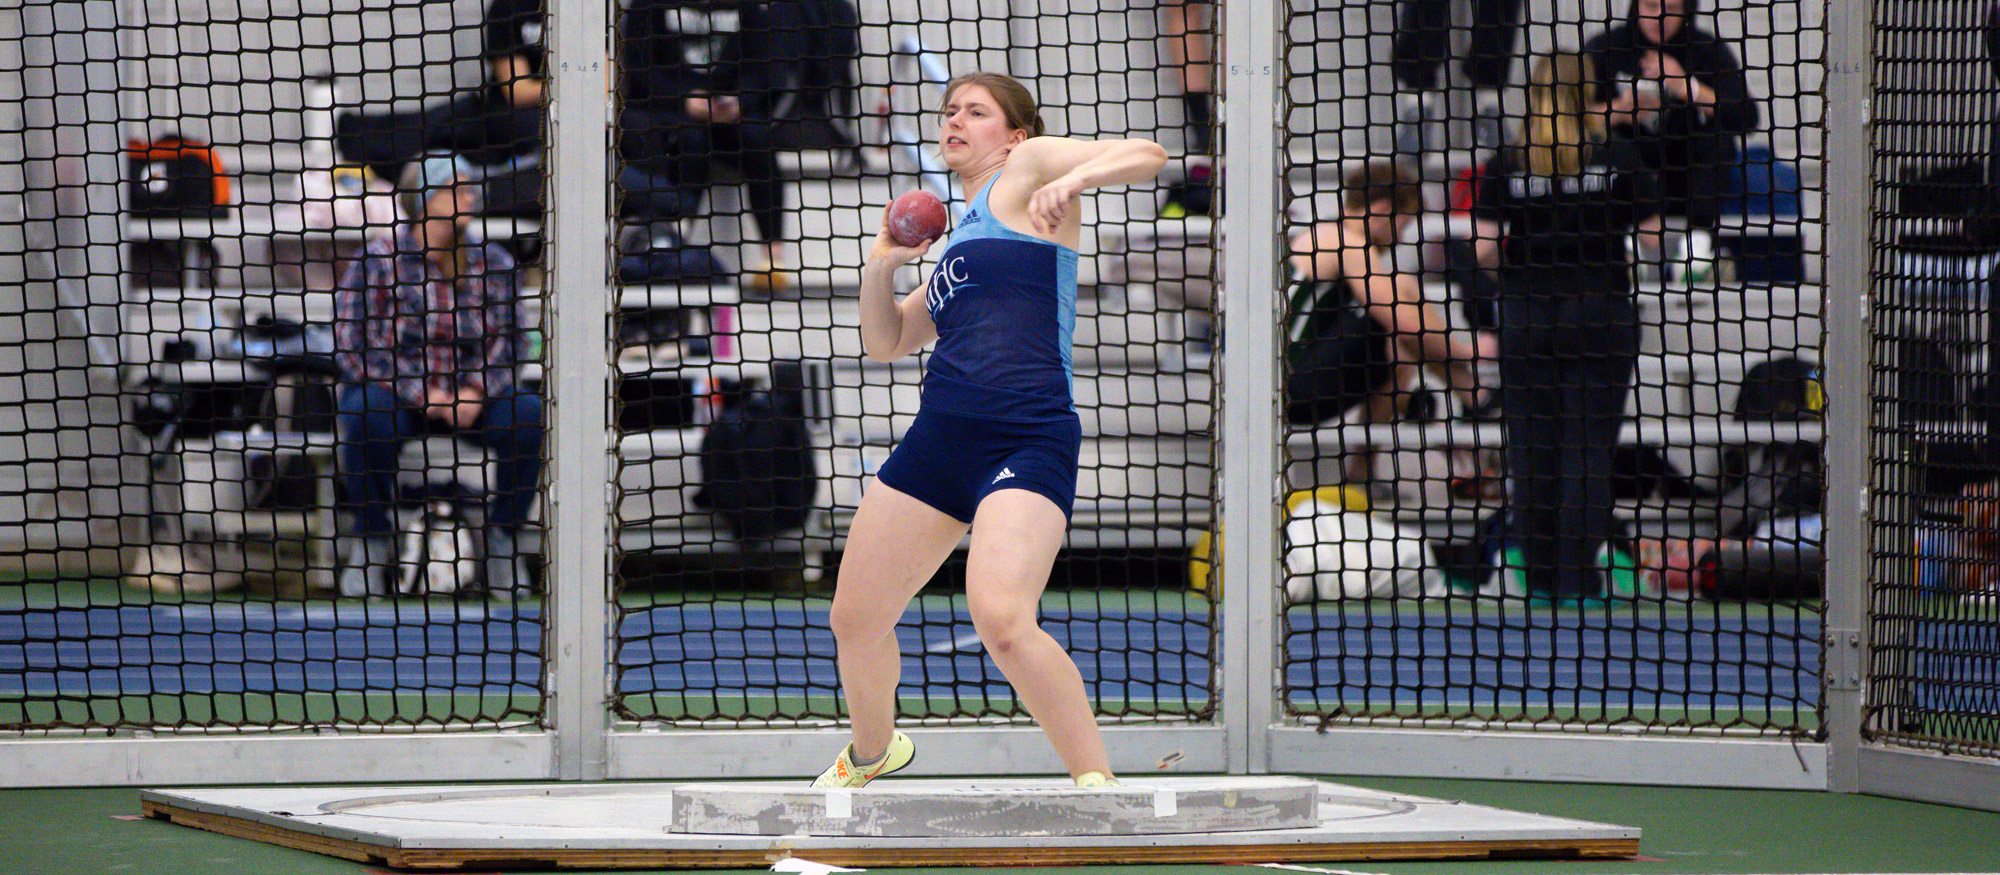 Emma Doyle had the top mark in the shot put among 21 competitors at the Middlebury Field & Track Meet on Feb. 11, 2023. (RJB Sports file photo)